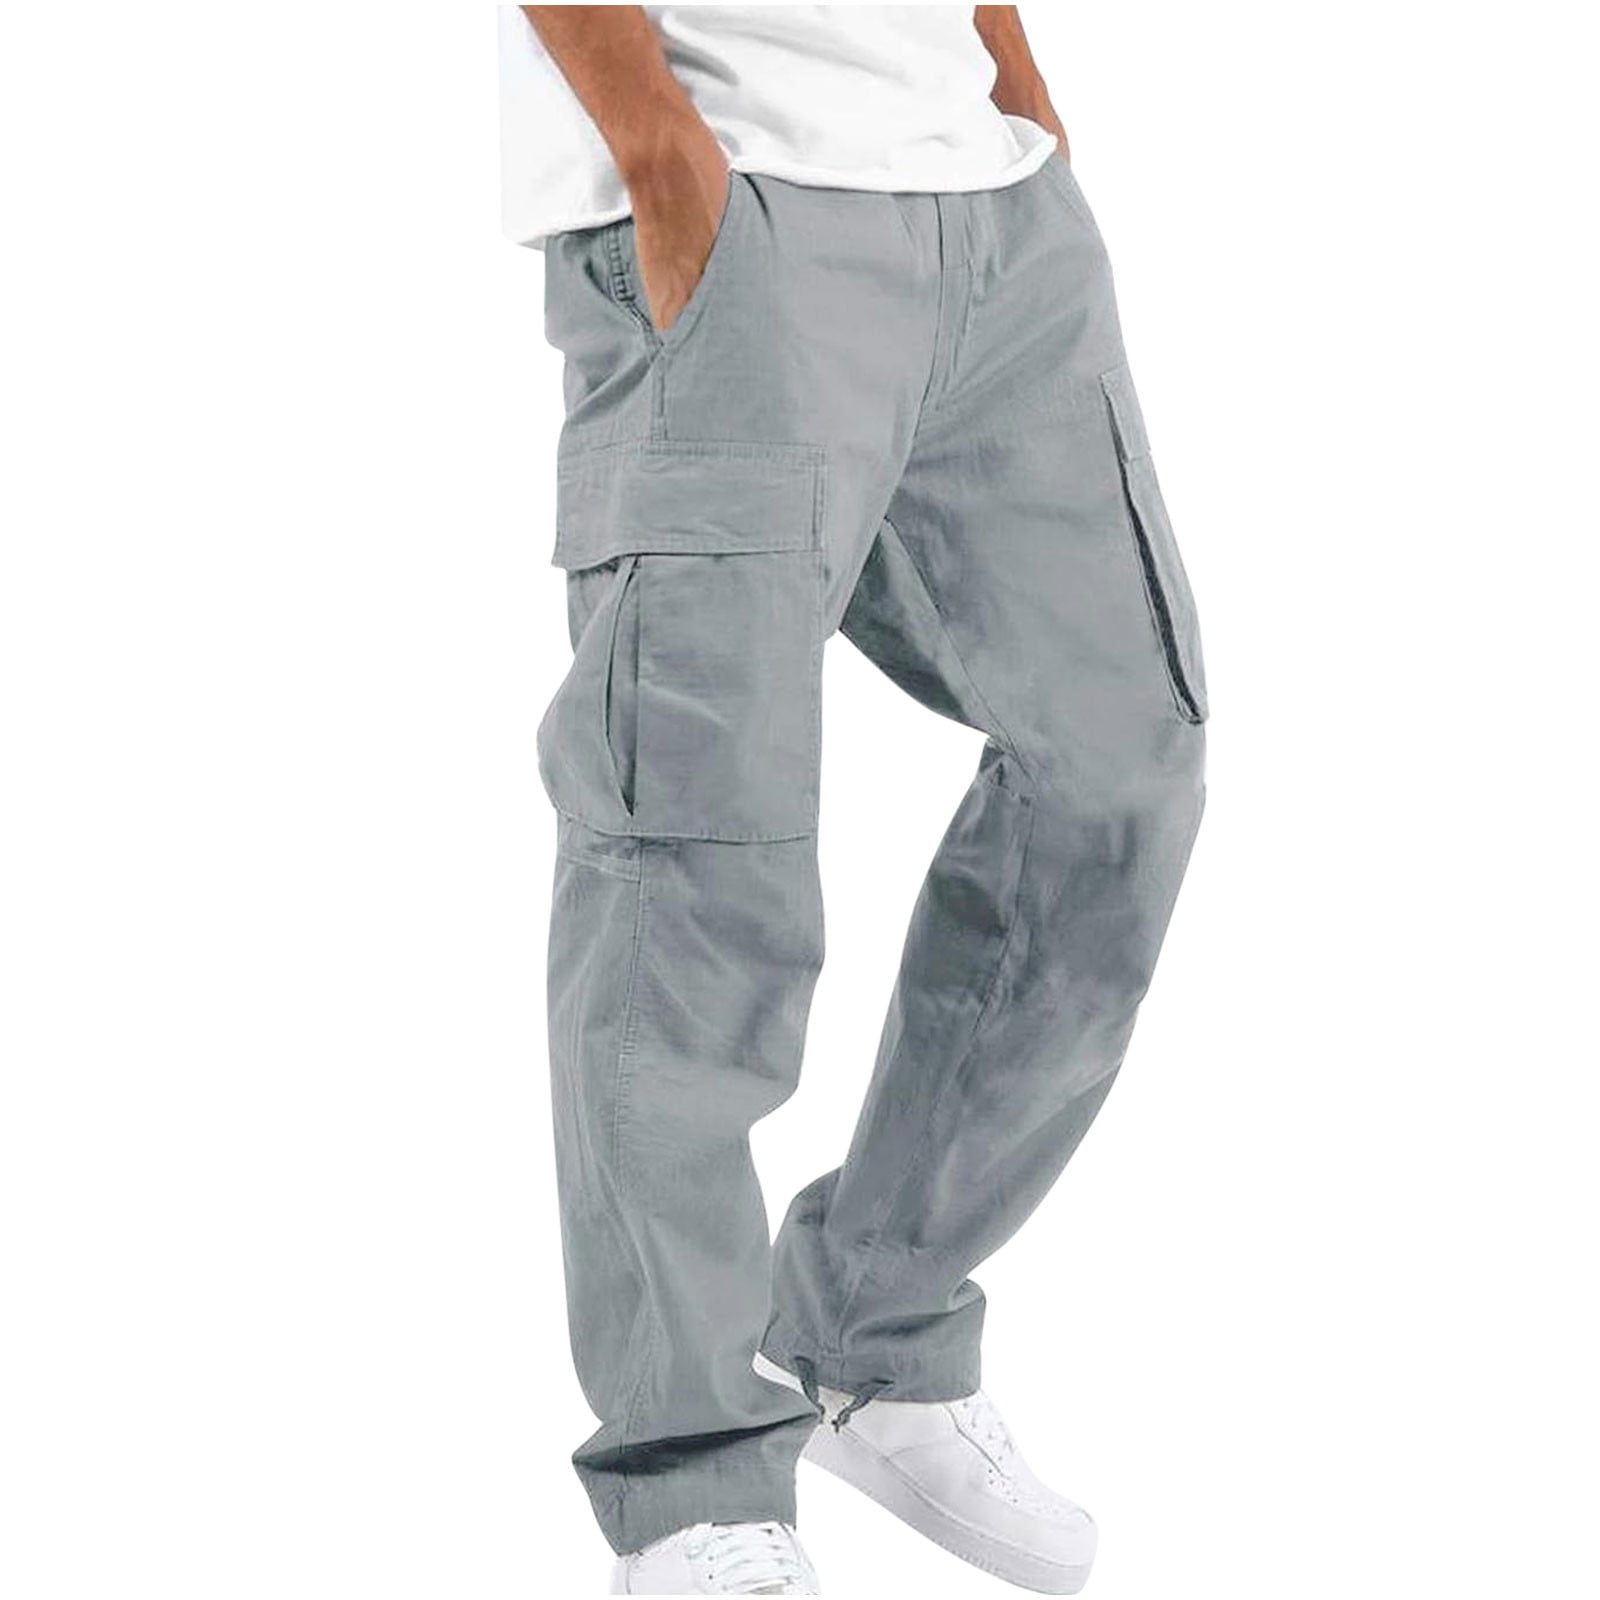 XFLWAM Men's Cargo Cargo Lightweight Work Pants Hiking Ripstop Cargo Pants  Relaxed Fit Mens Cargo Pant-Reg and Big and Tall Sizes Gray XL